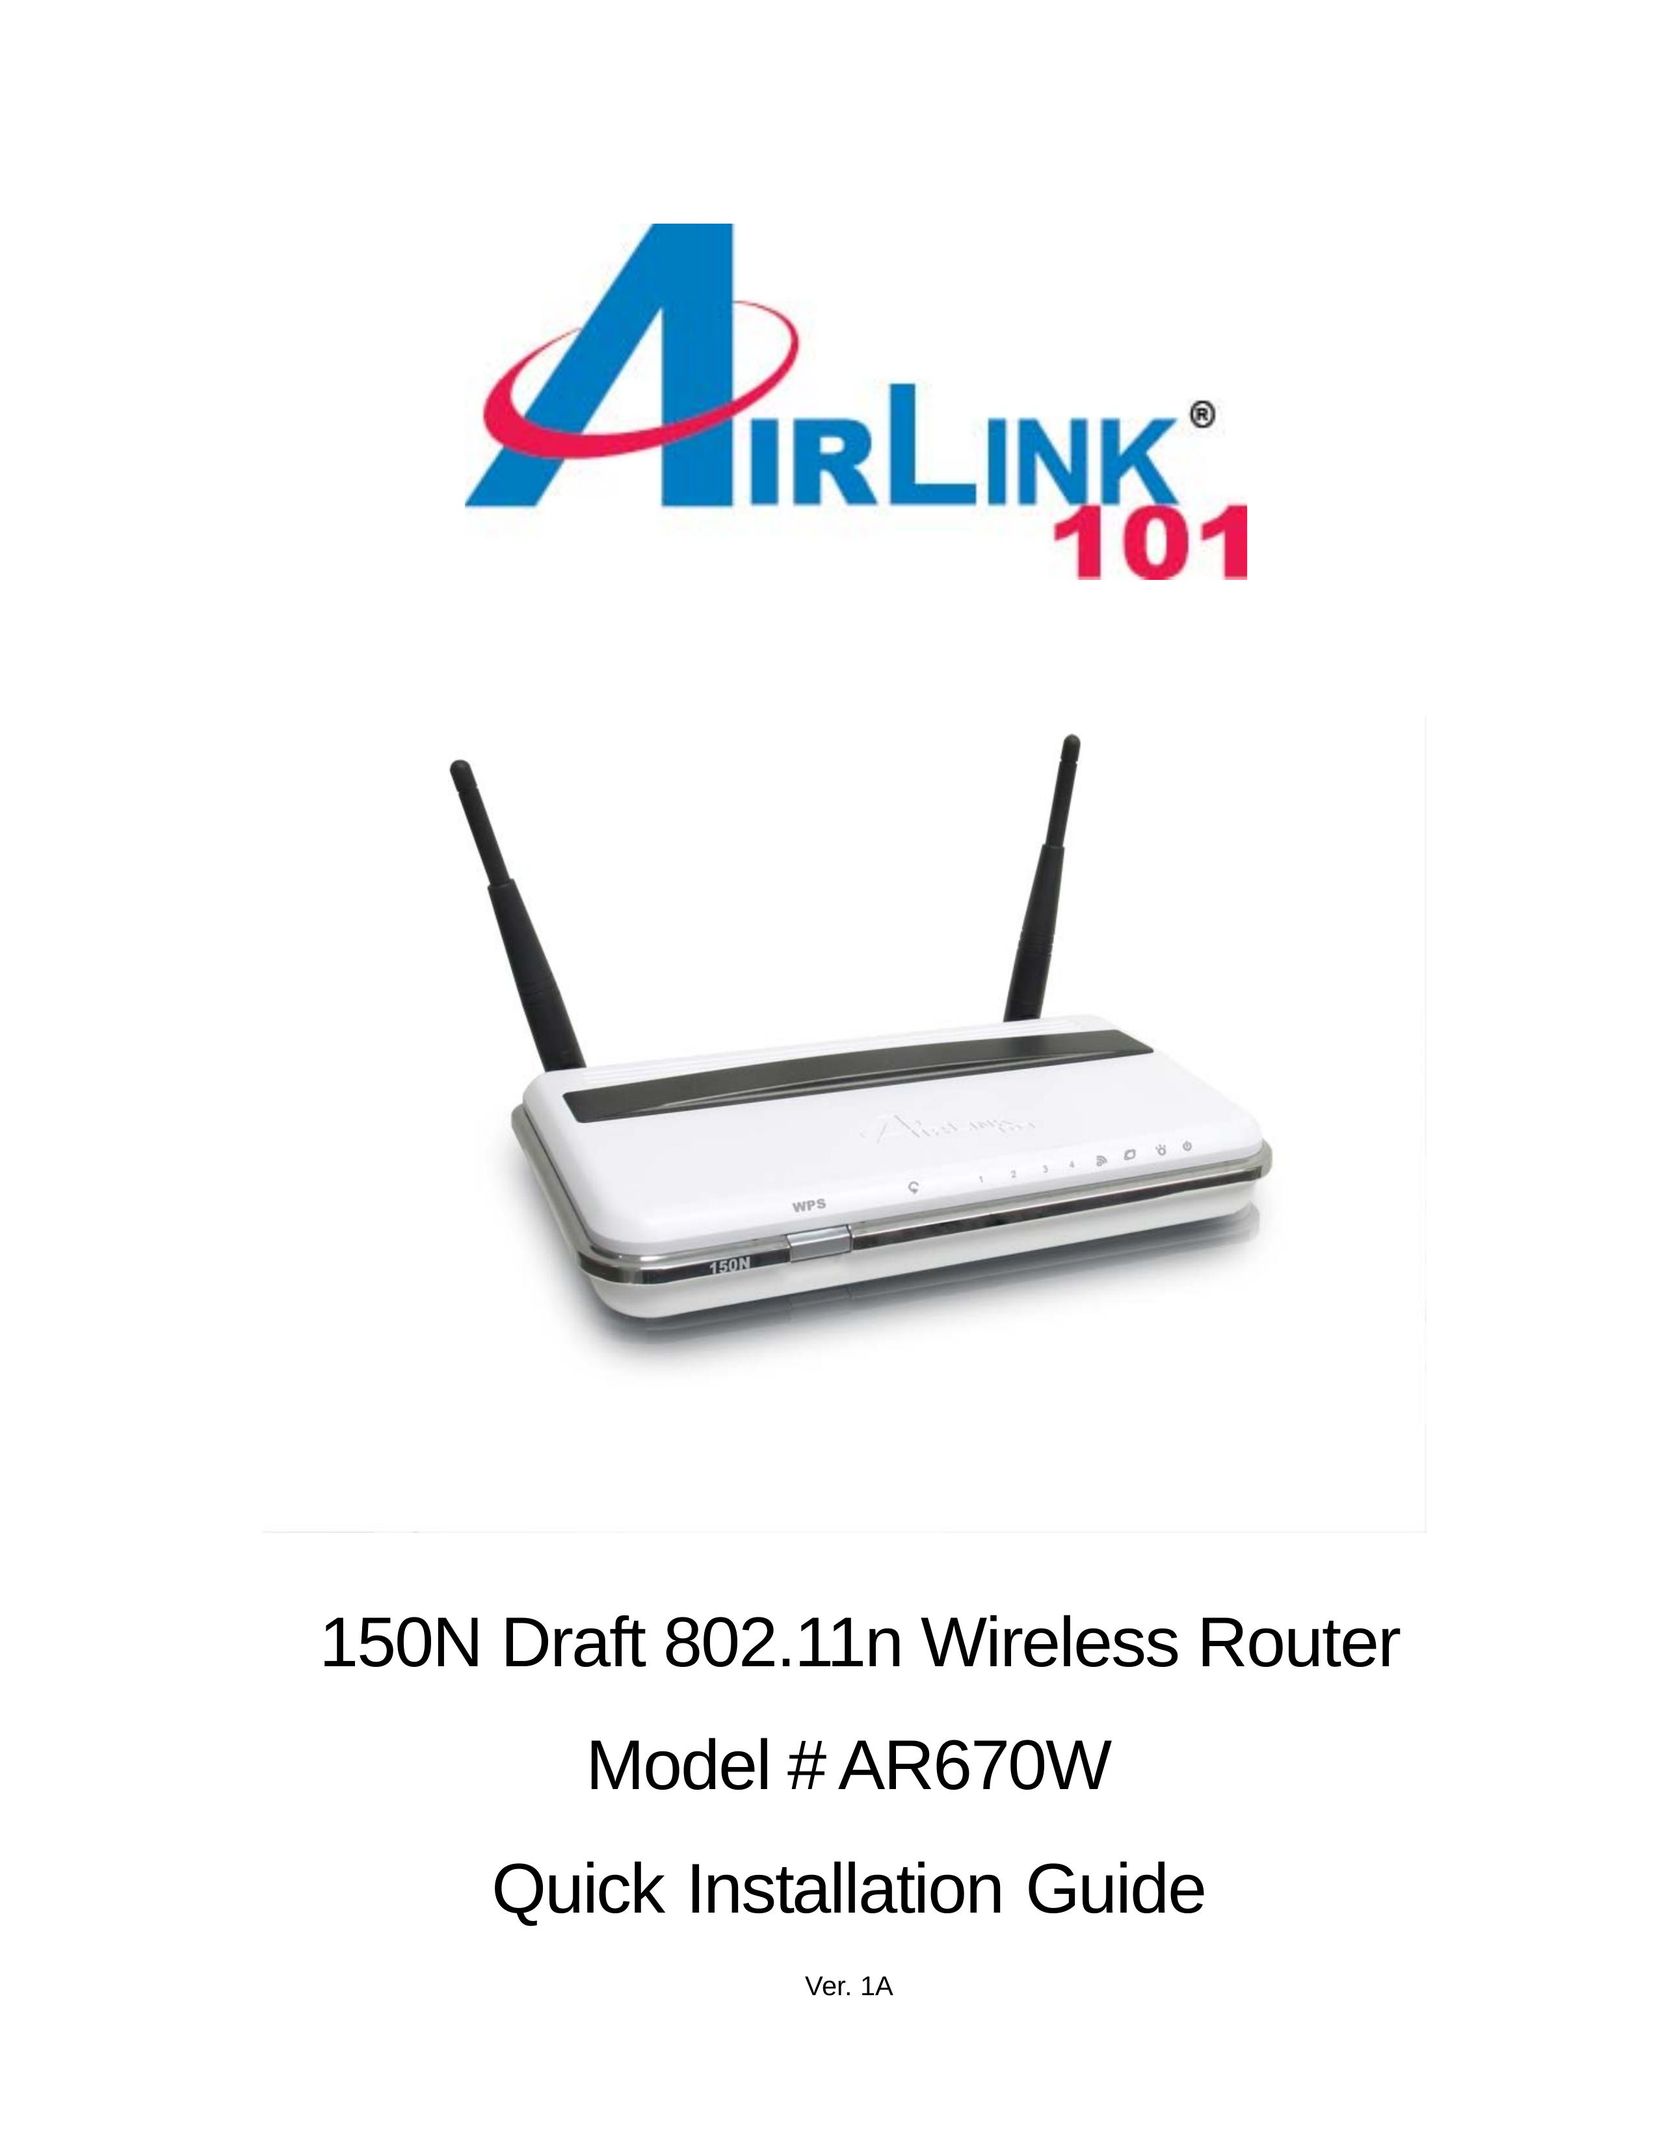 Airlink101 AR670W Network Router User Manual